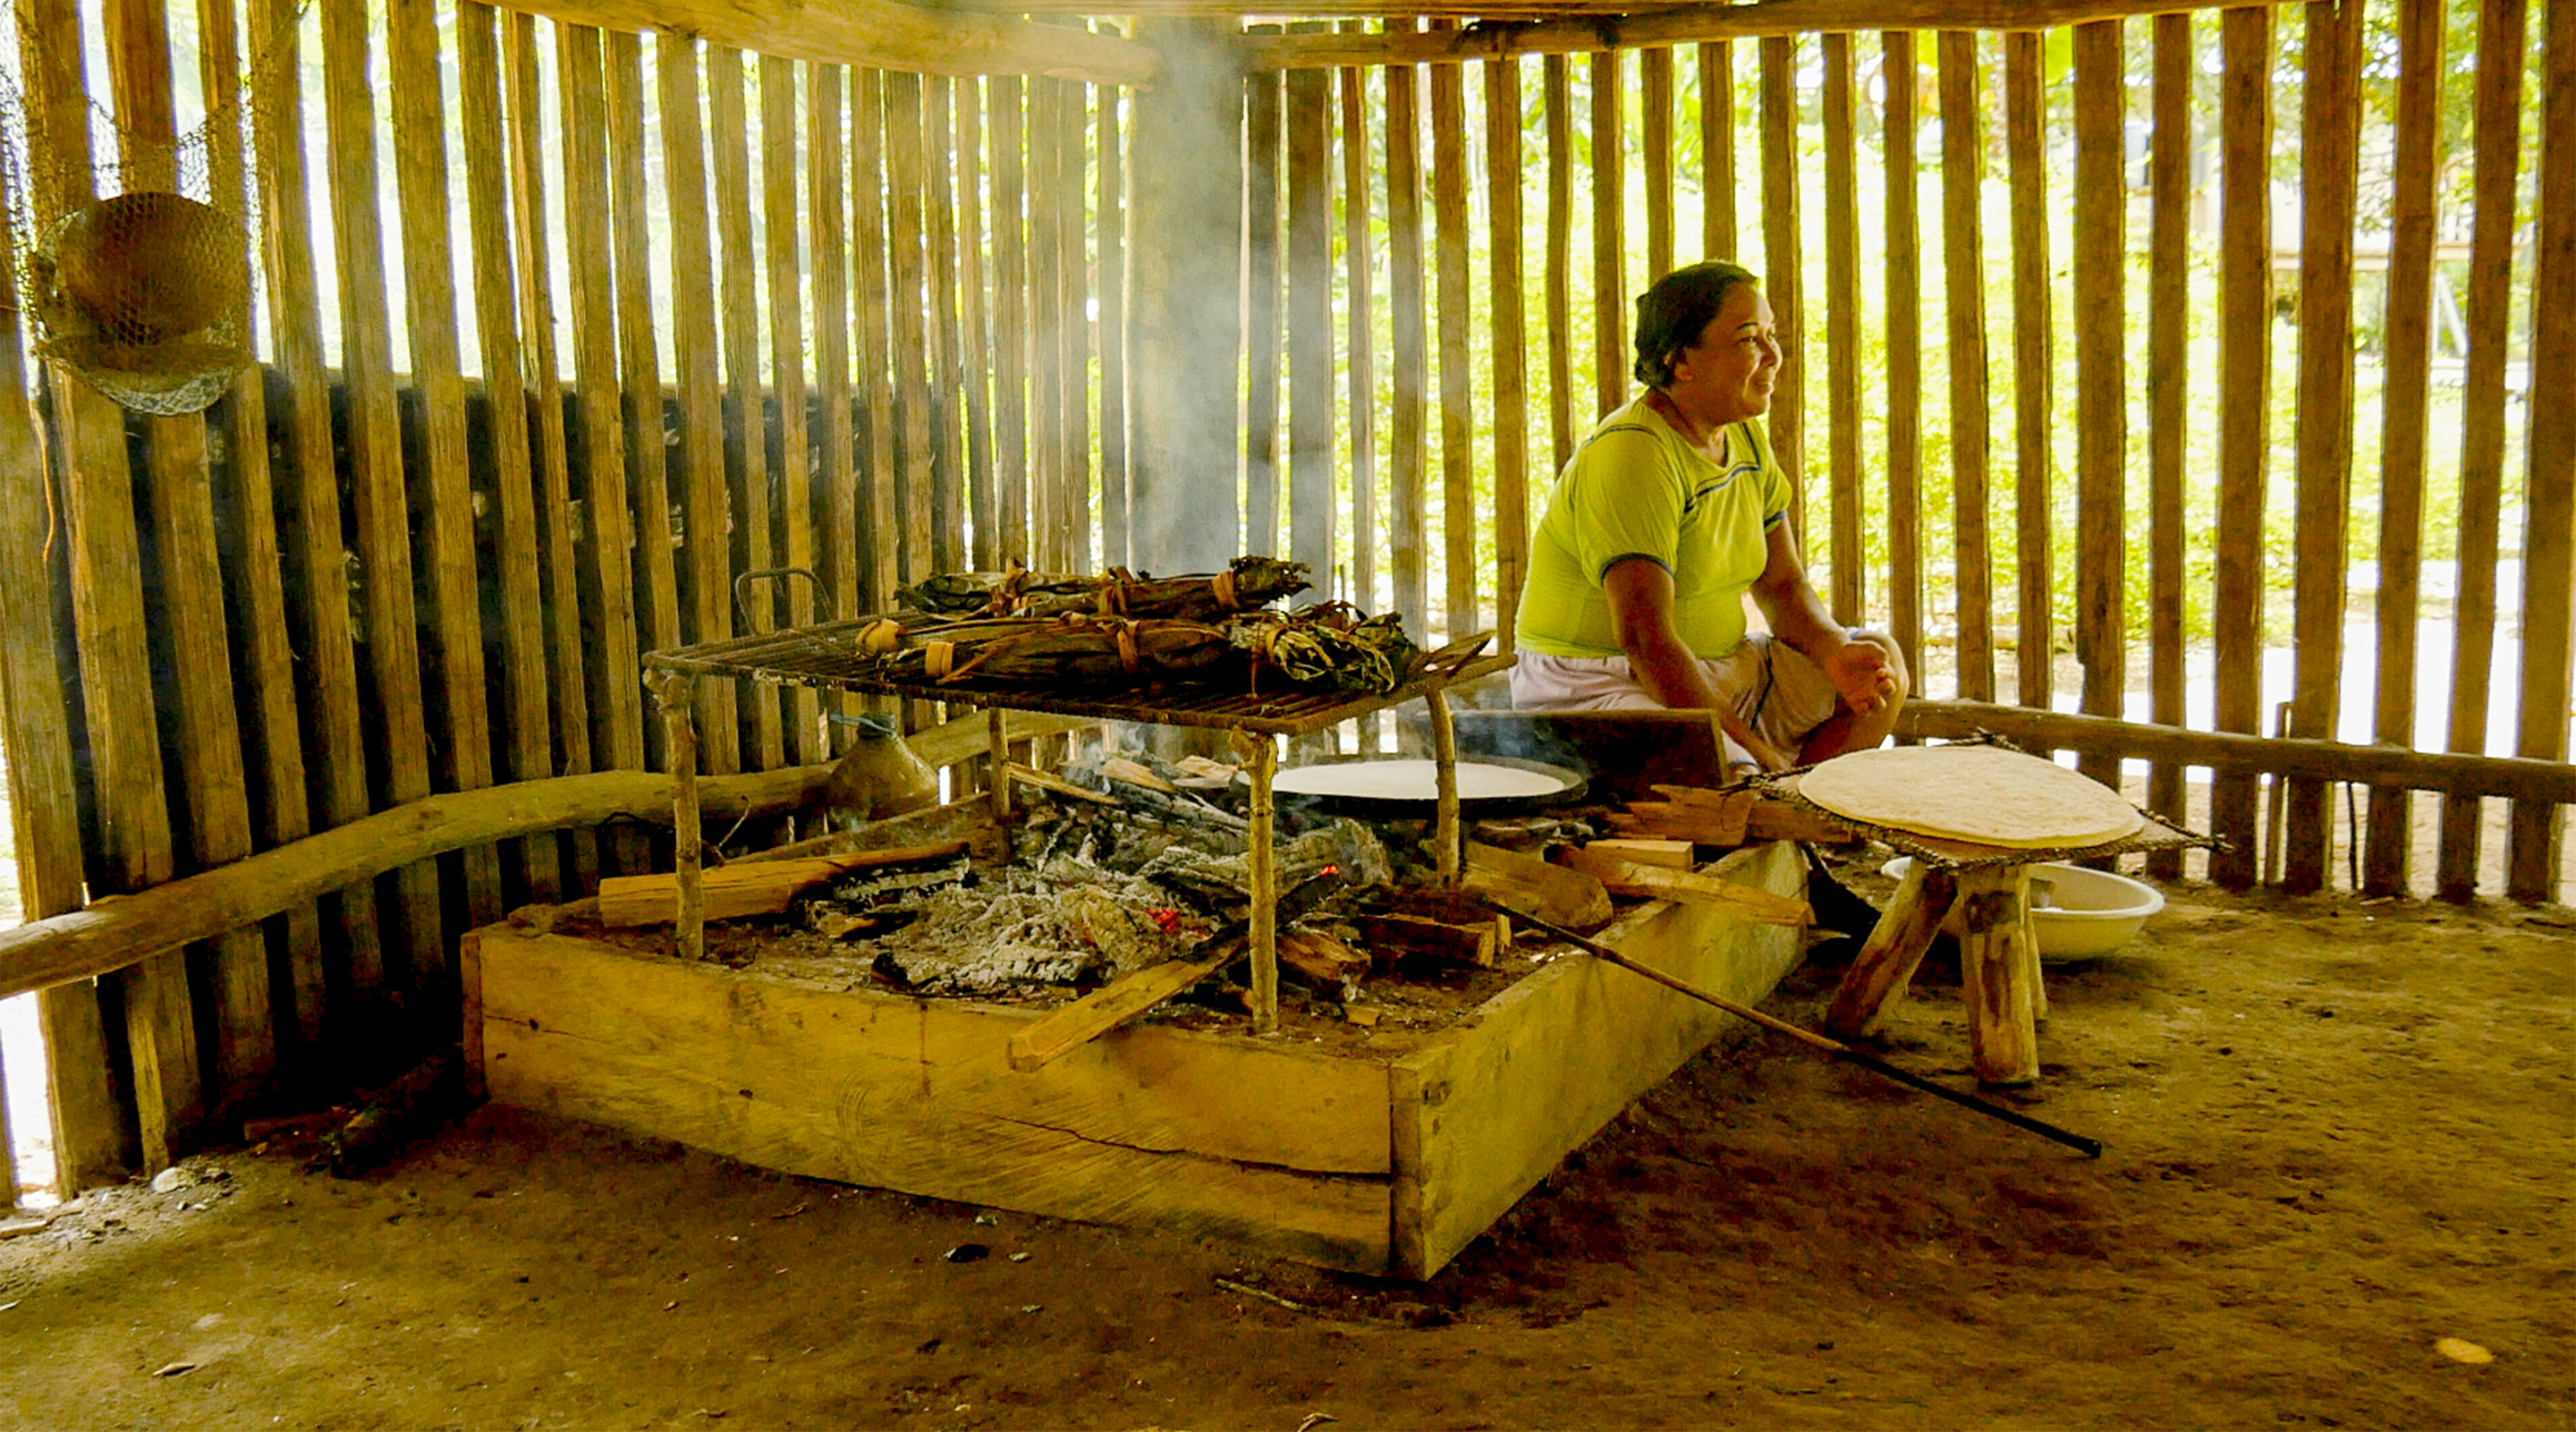 The locals use open air kitchens to help with the jungle heat.